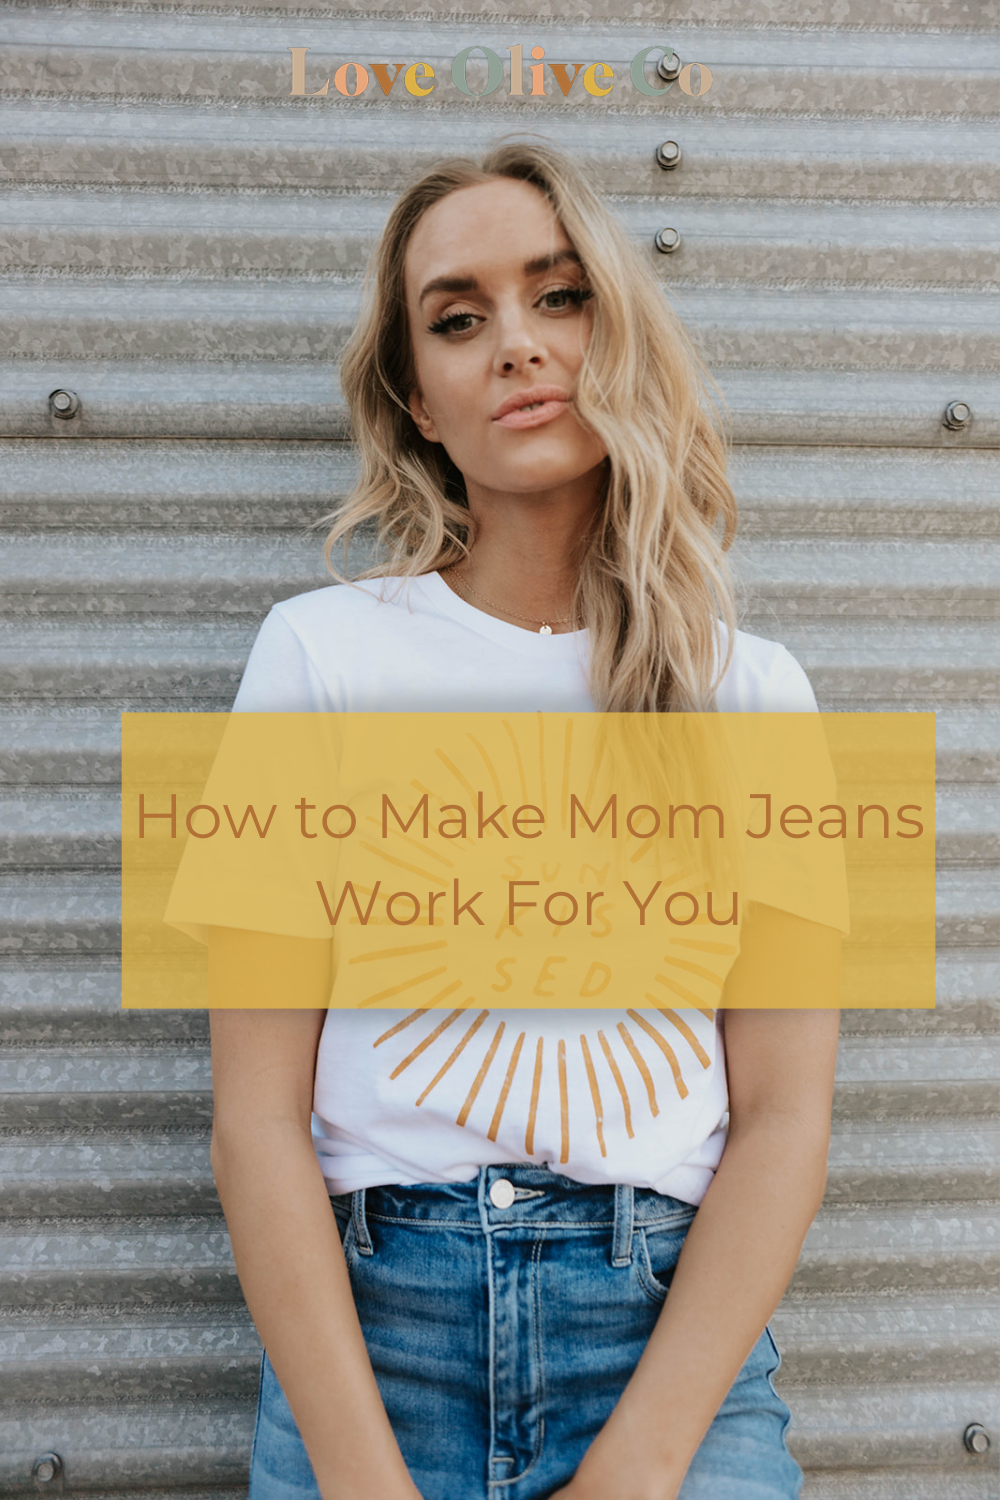 How to Make Mom Jeans Work For You